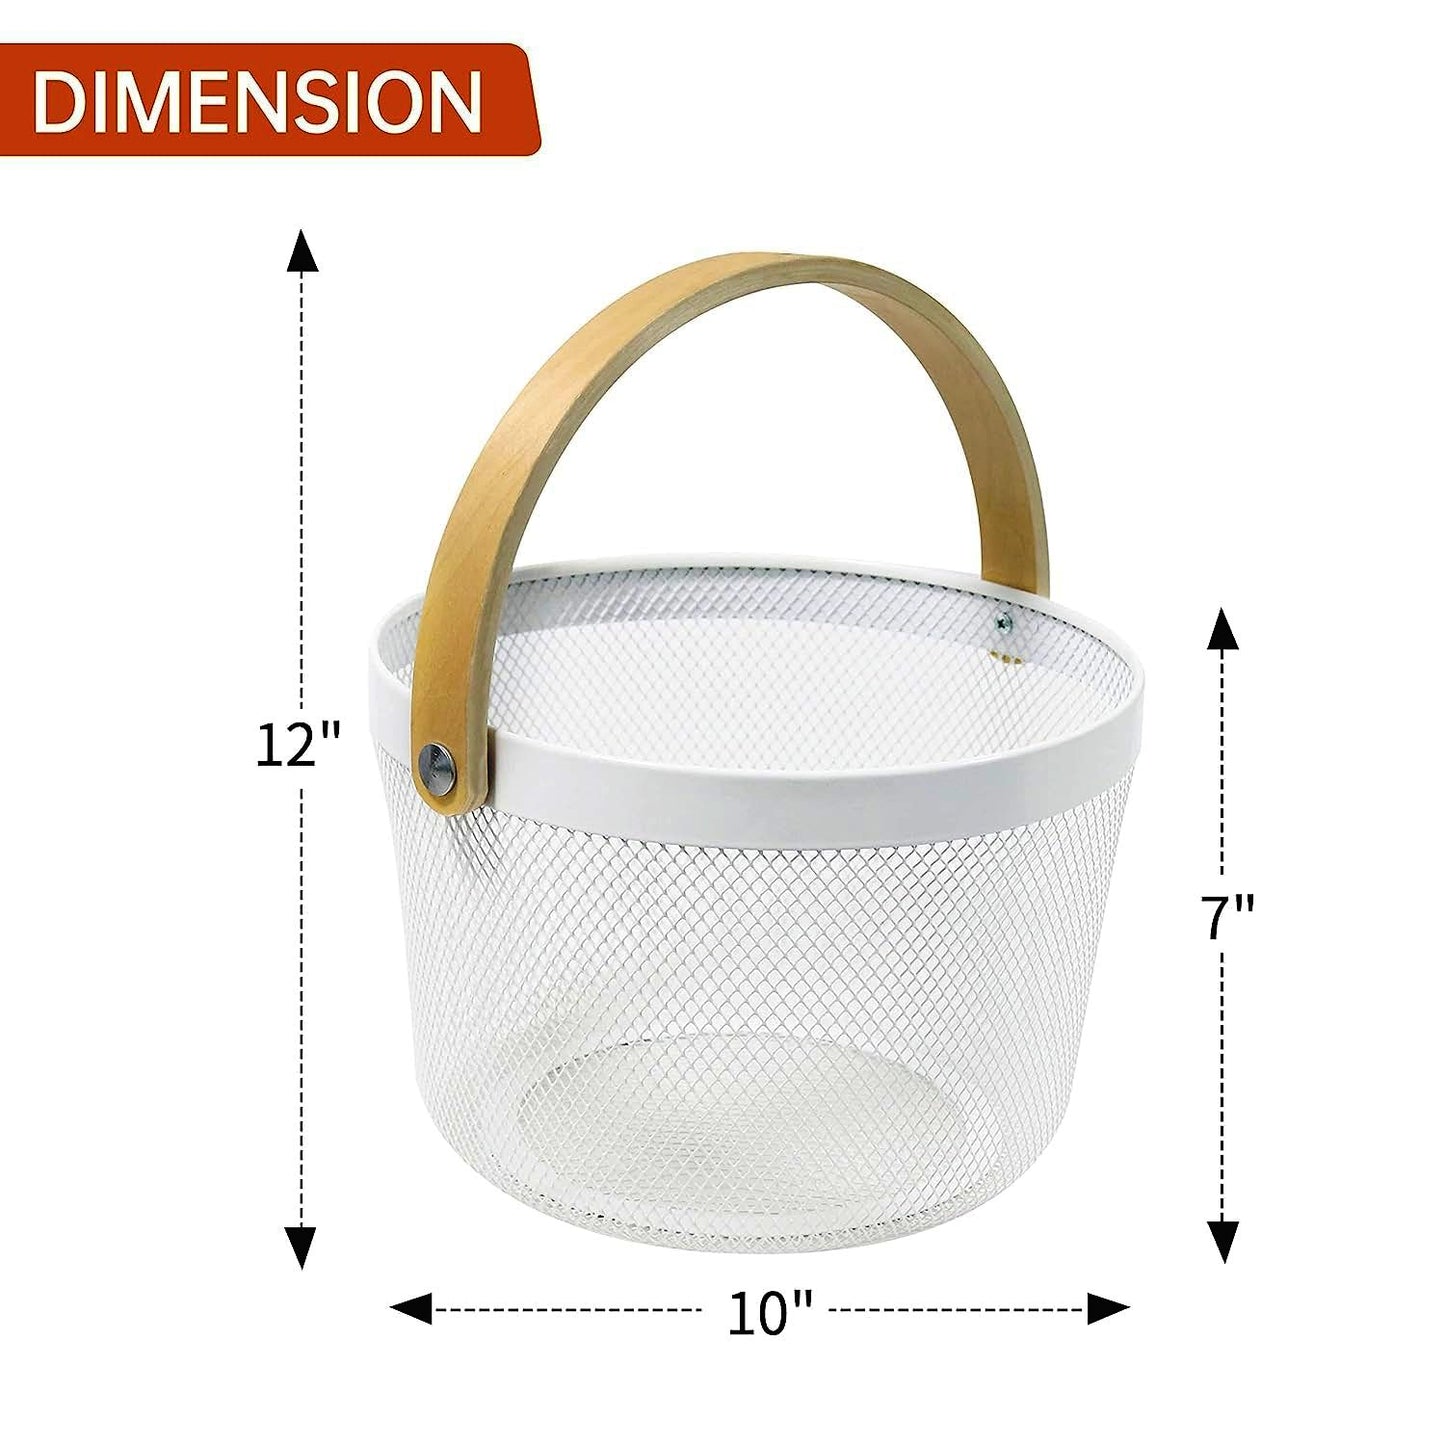 Mesh Steel Basket with Wooden Handle-Round White Apricot